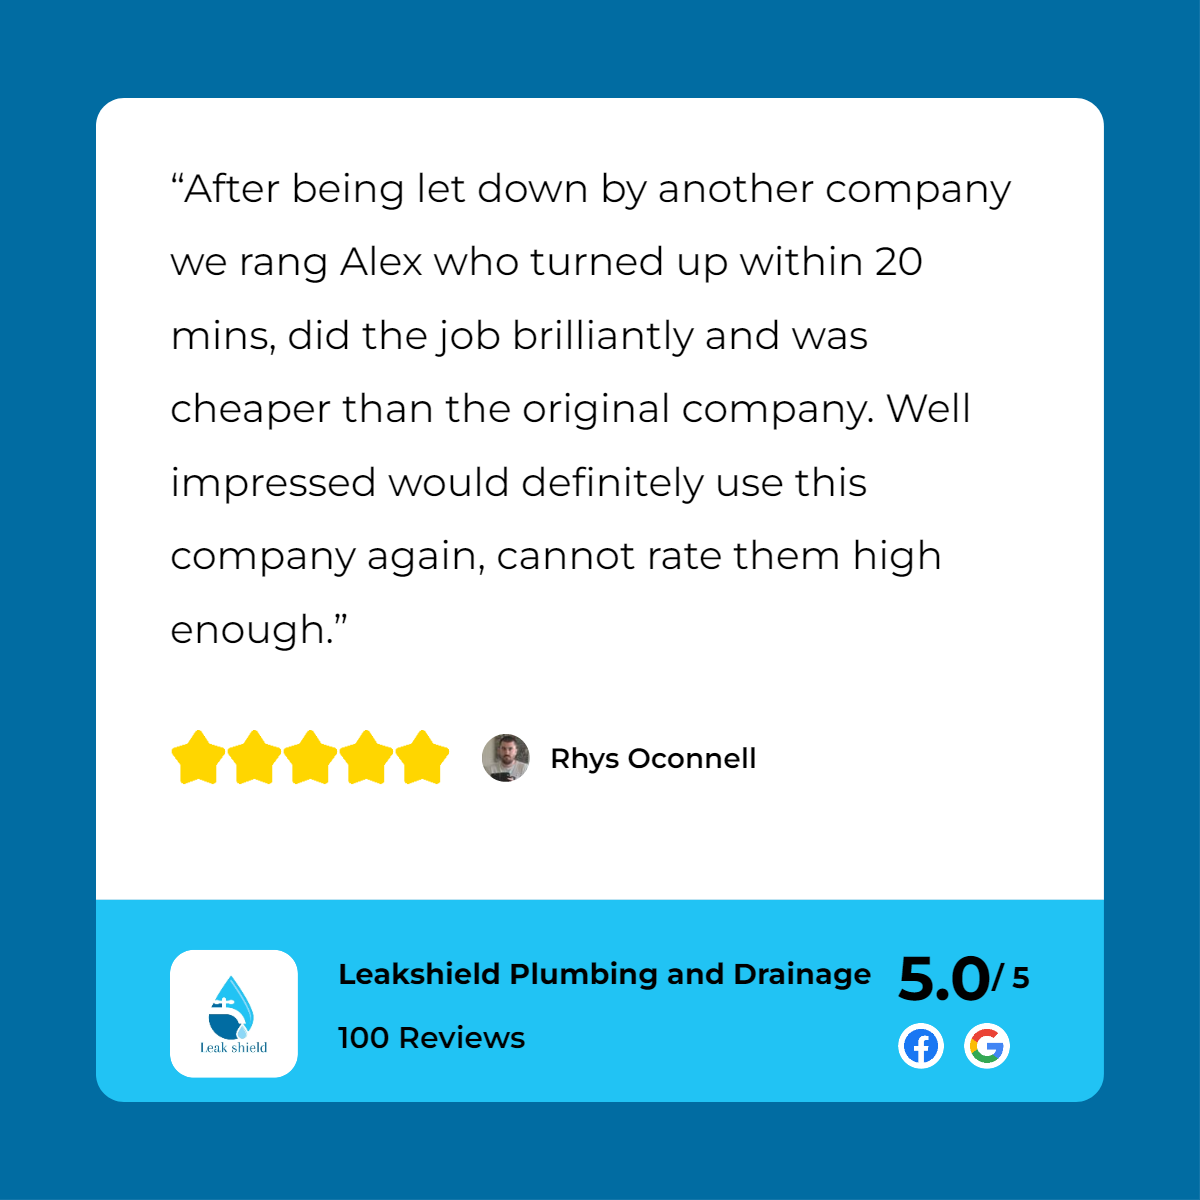 A review of a company with a star rating.